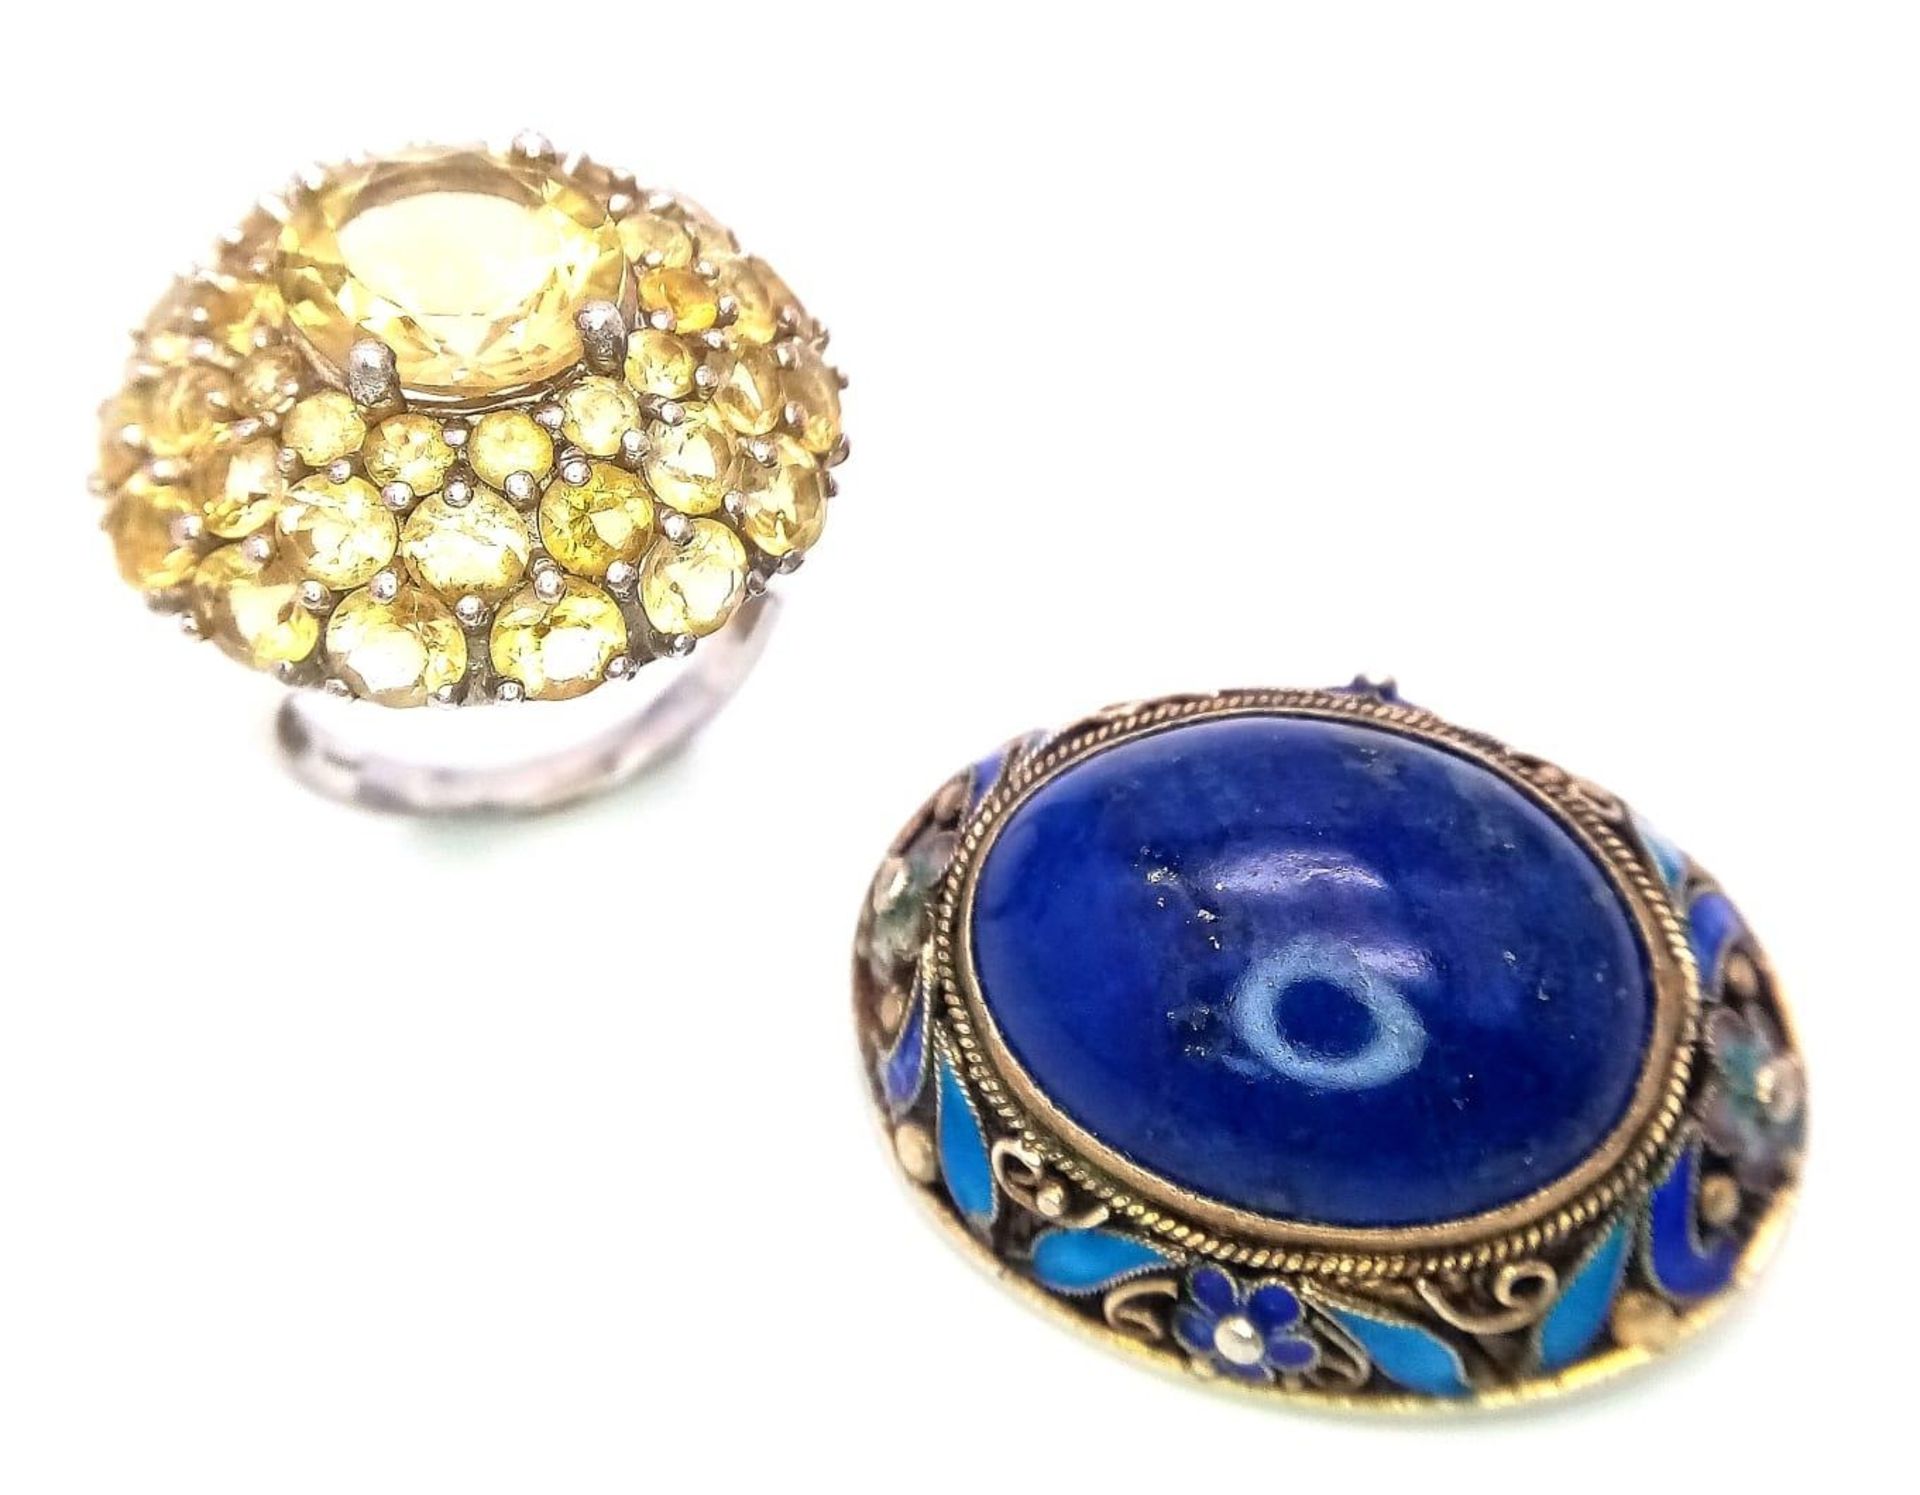 Two Vintage Silver Jewellery Pieces - Lapis and enamel brooch - 3.5cm and a Citrine cluster ring -